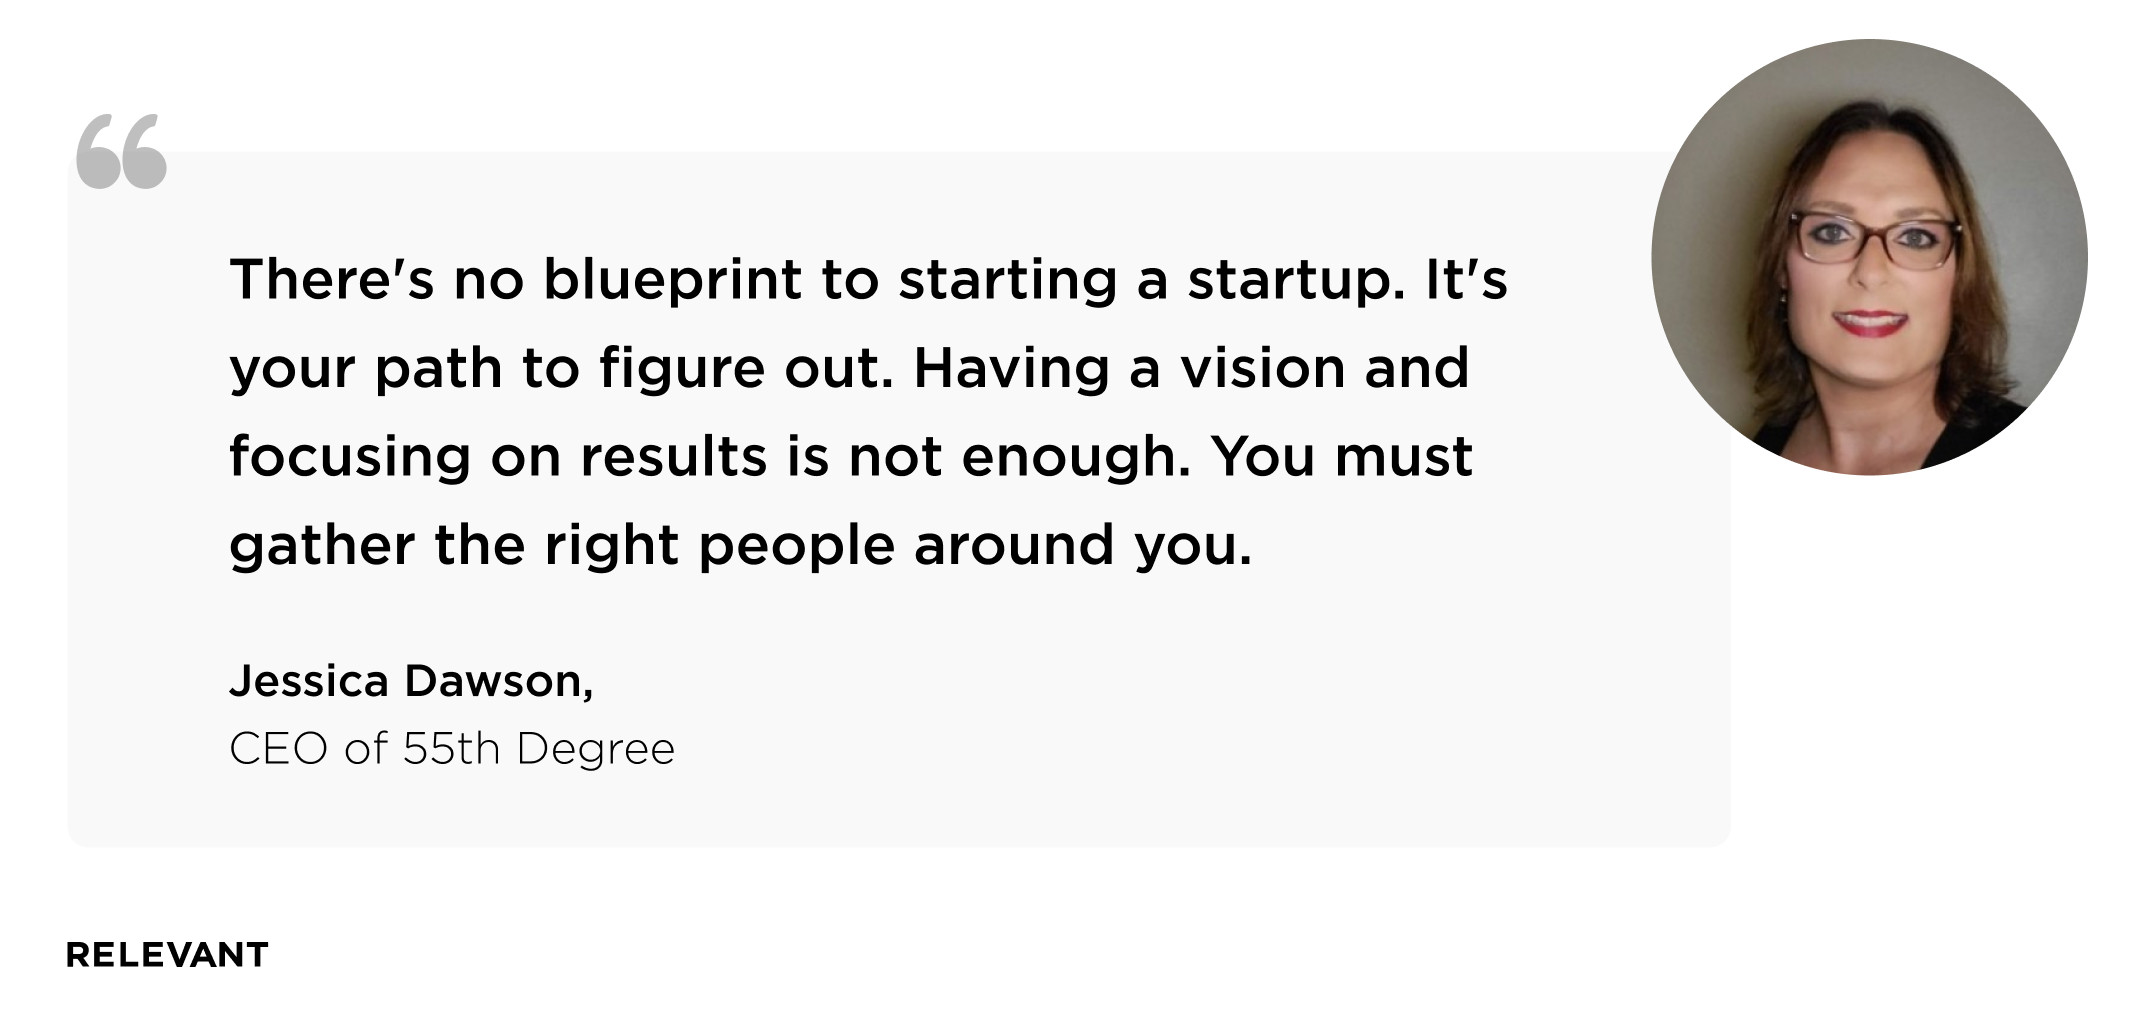 “There's no blueprint to starting a startup. It's your path to figure out. Having a vision and focusing on results is not enough. You must gather the right people around you. Jessica Dawson, CEO of 55th Degree